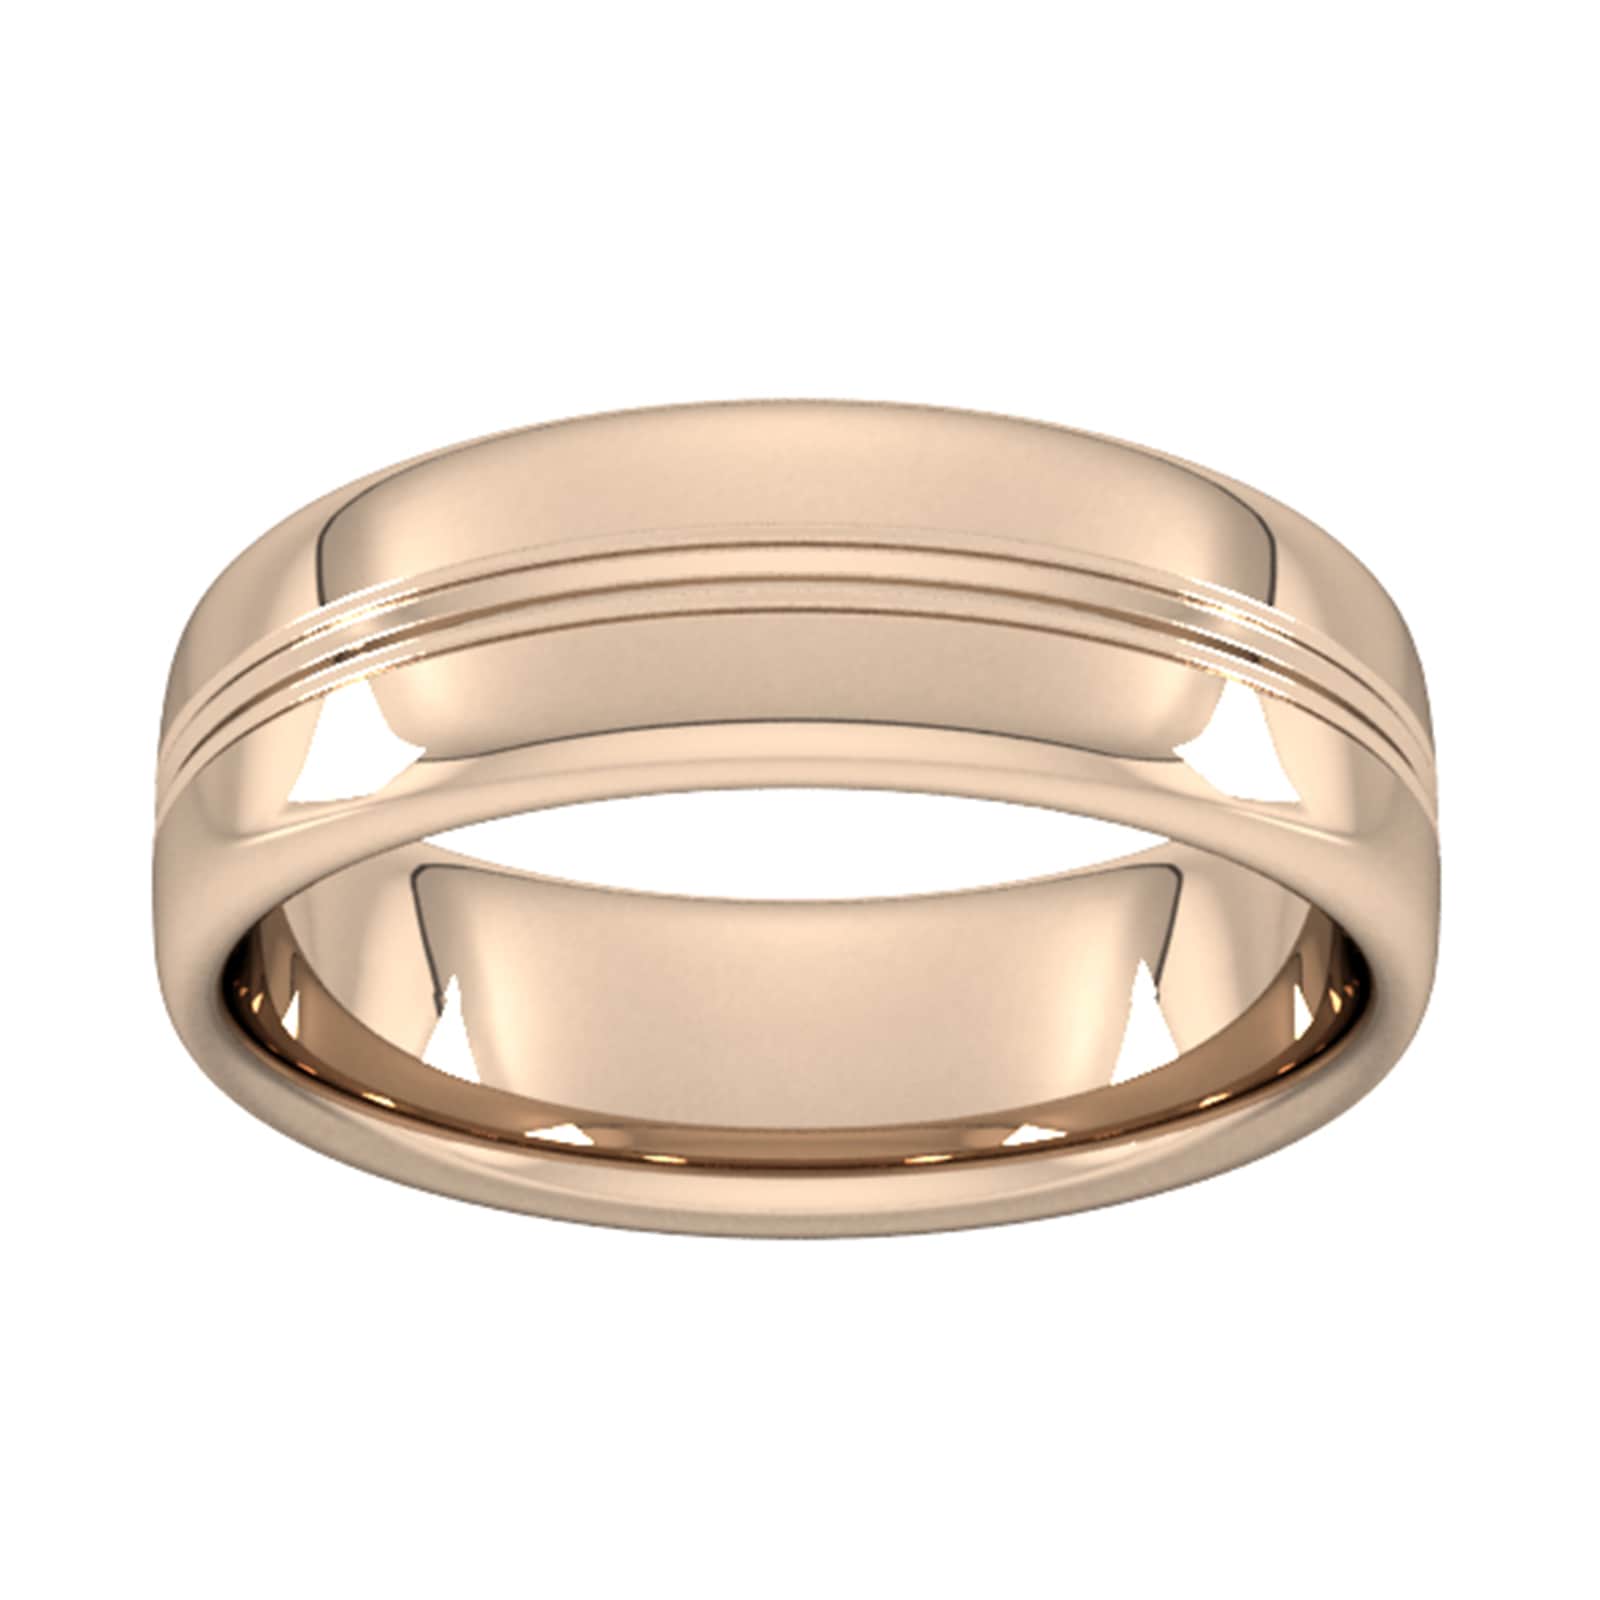 7mm Slight Court Standard Grooved Polished Finish Wedding Ring In 9 Carat Rose Gold - Ring Size O